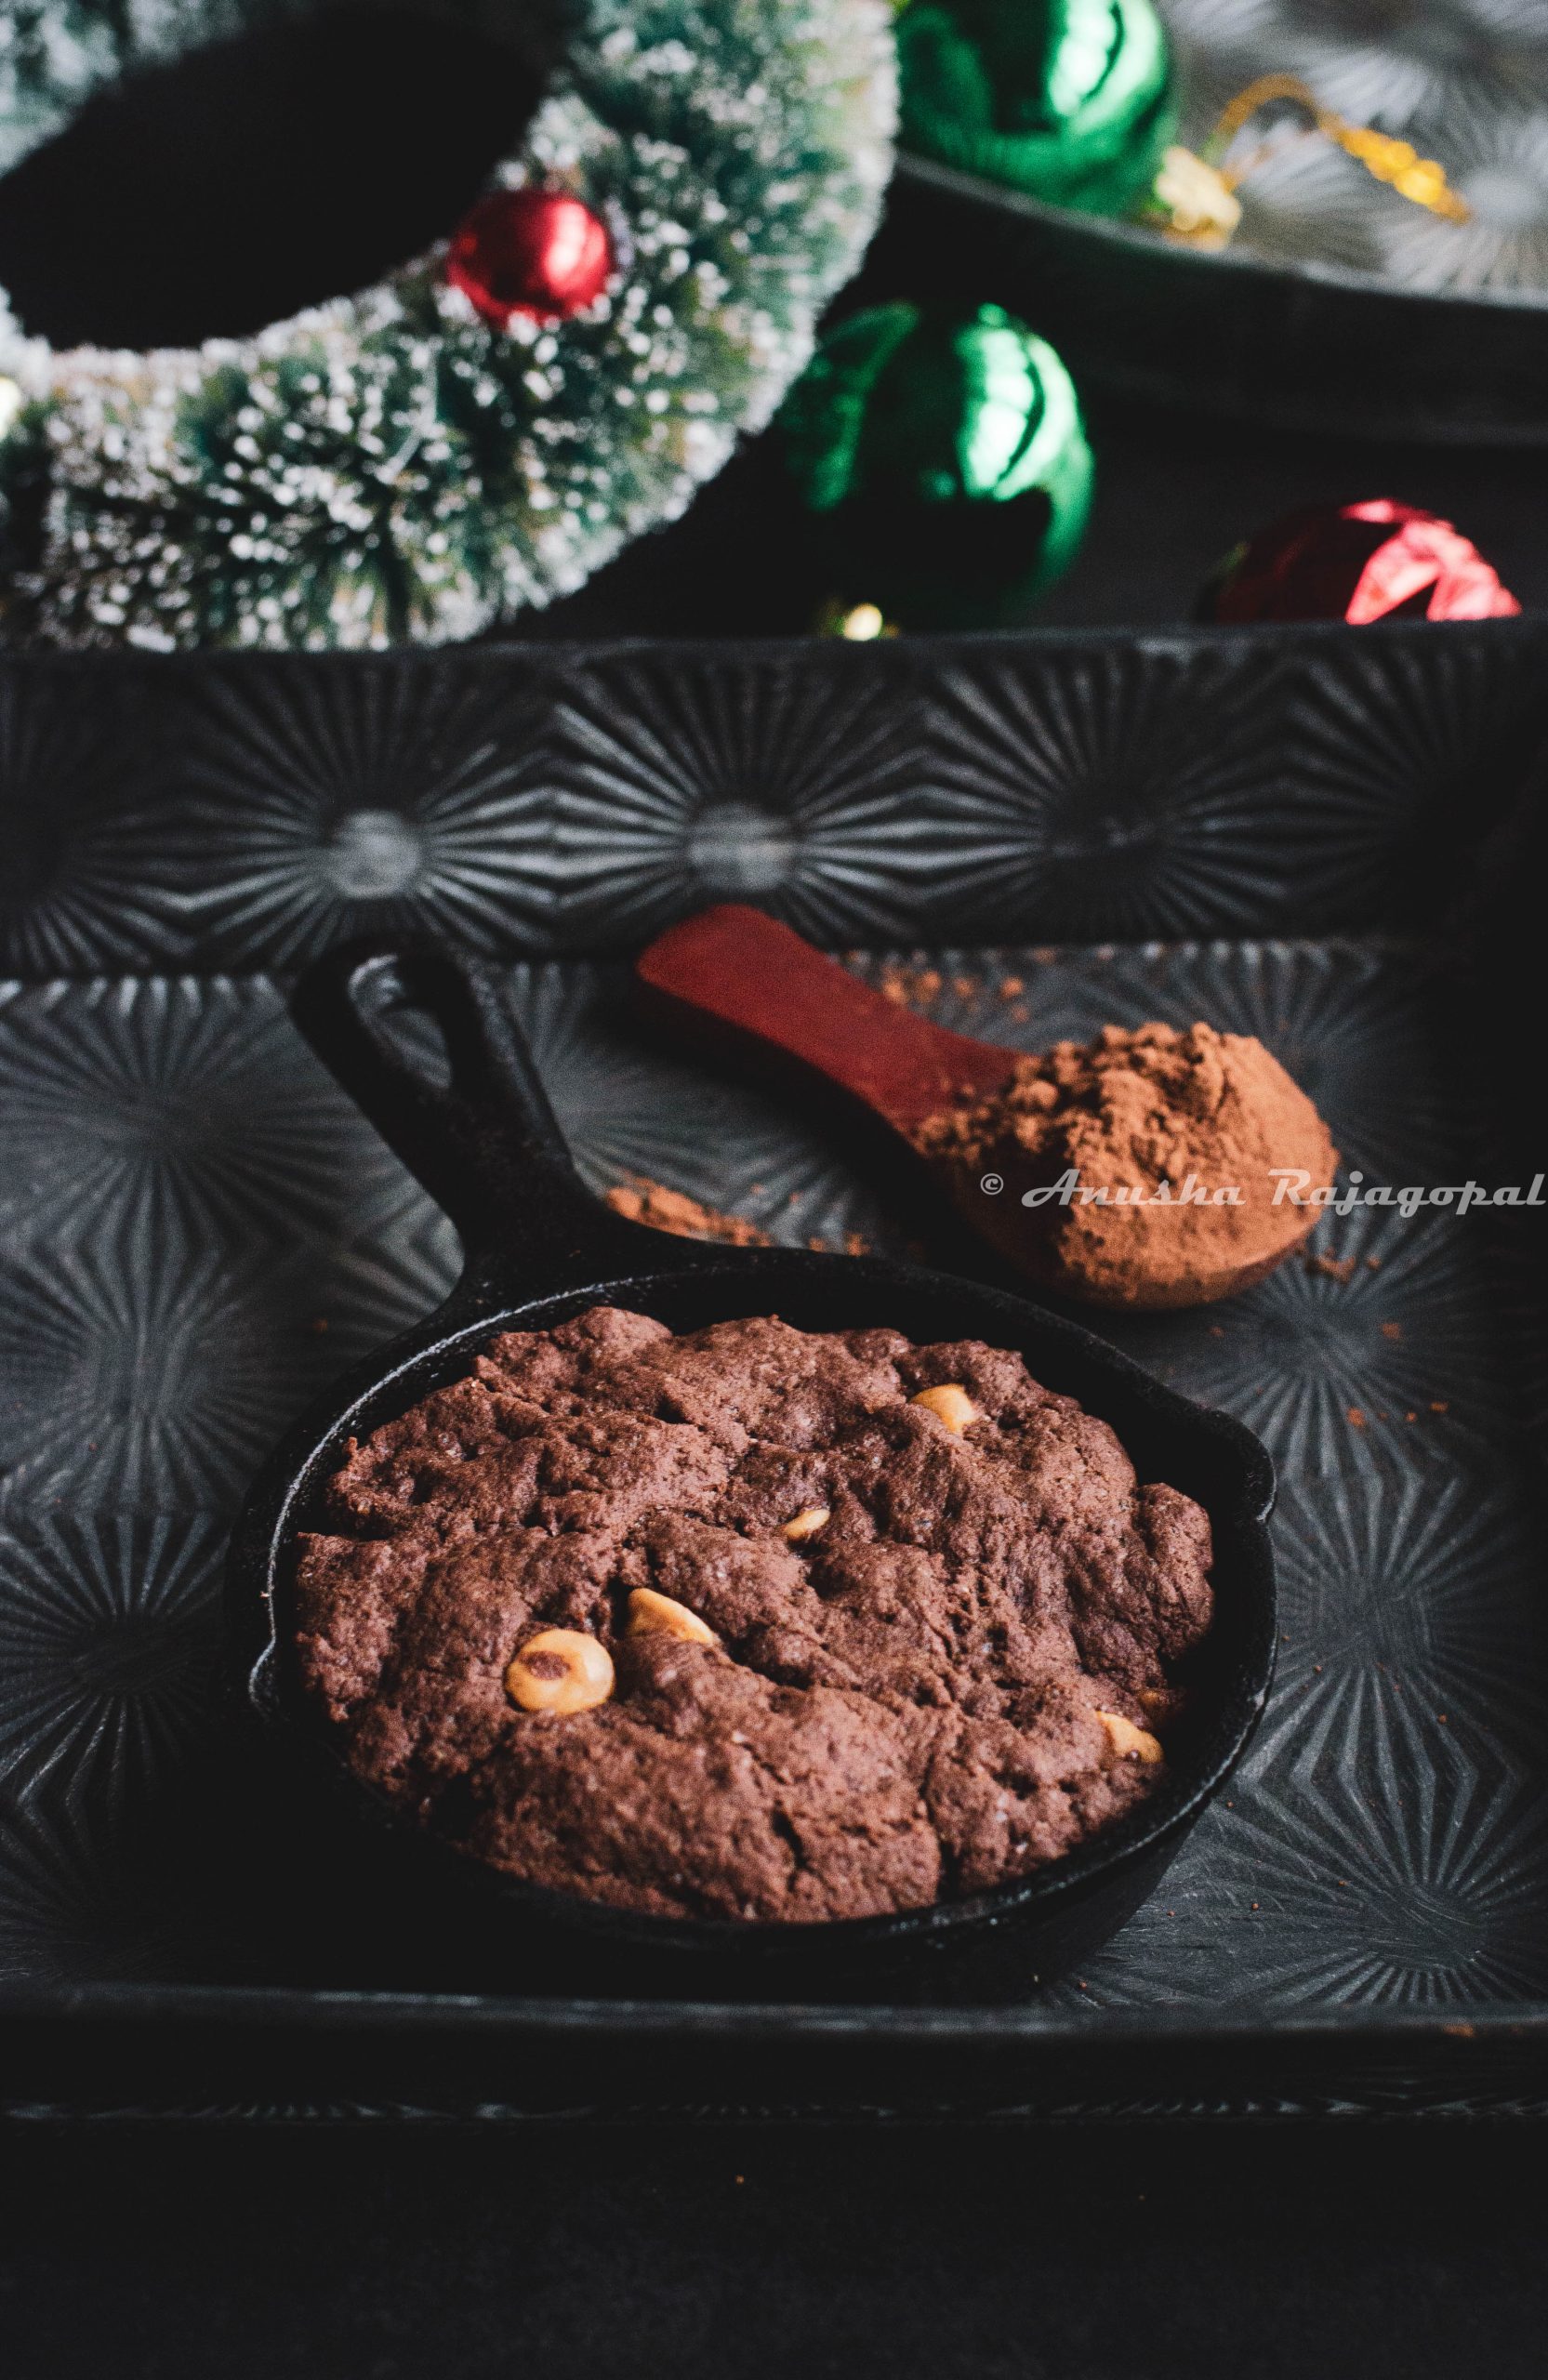 salted caramel chocolate cookie for one baked in a skillet